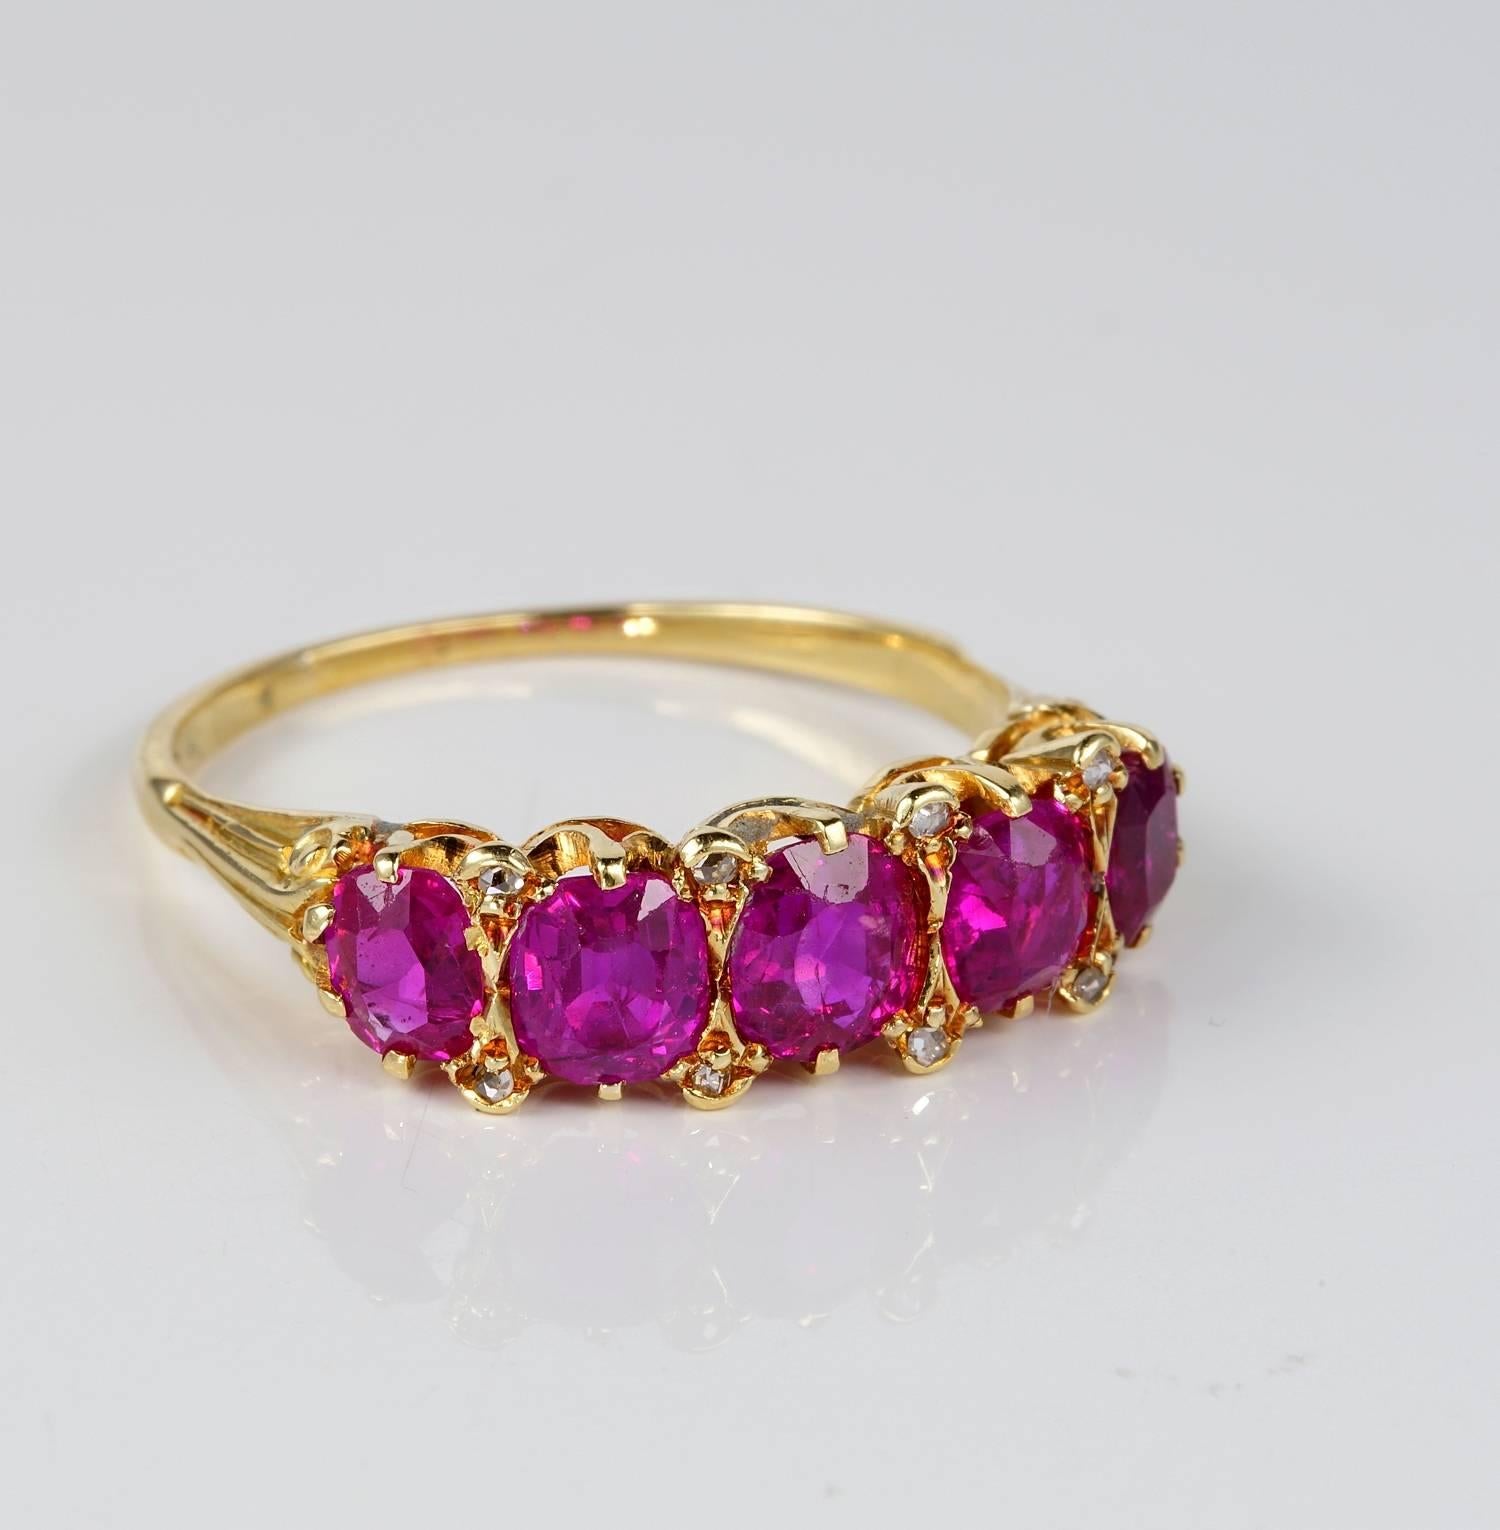 Spectacular and rare Victorian five stone English ring set with Natural, untreated, unheated Burma Rubies full certified by London 
Gem lab.
Stunning Red colour Burmese Rubies, the most desirable, cushion cut, well matched in colour totalling 3.20